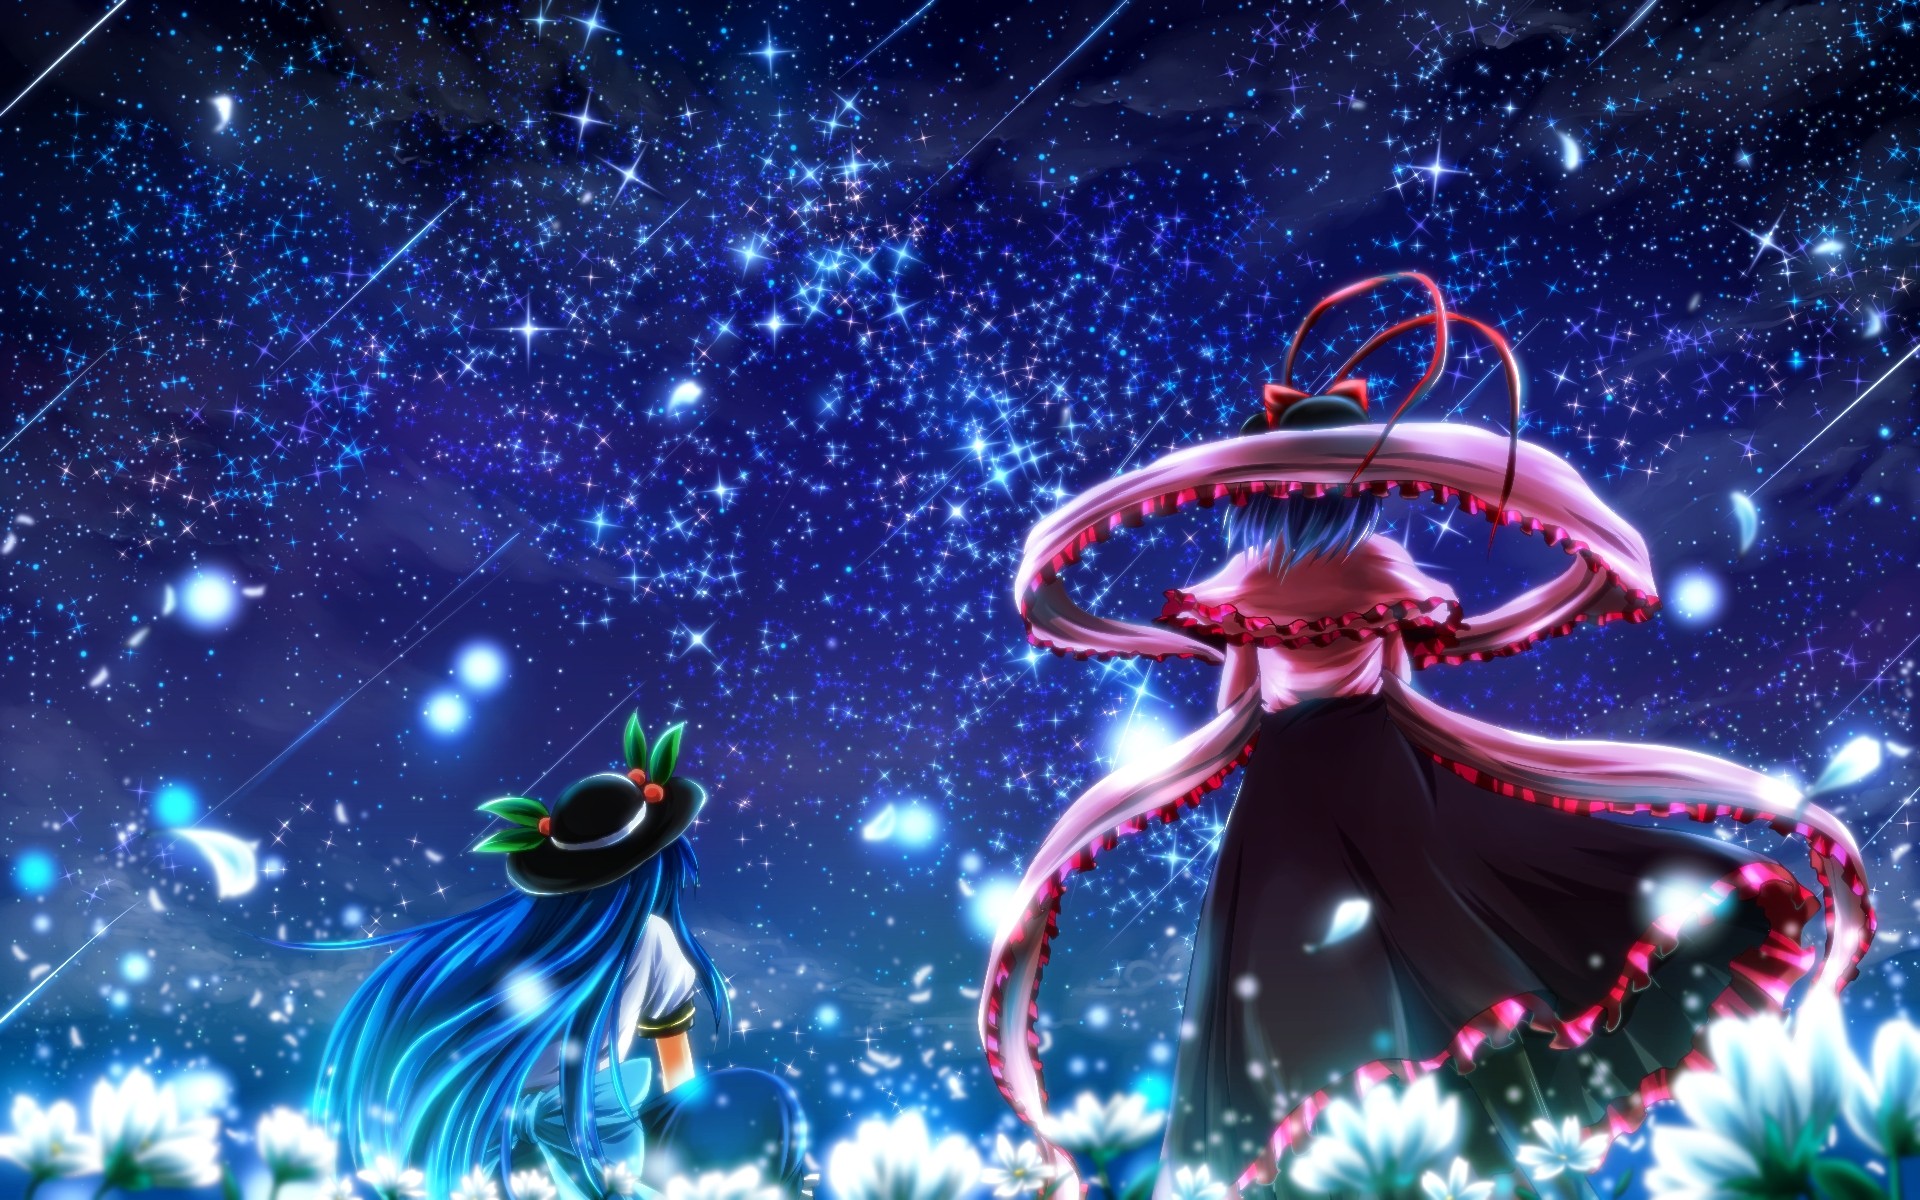 Wallpaper Details File Name Amazing Touhou Uploaded By